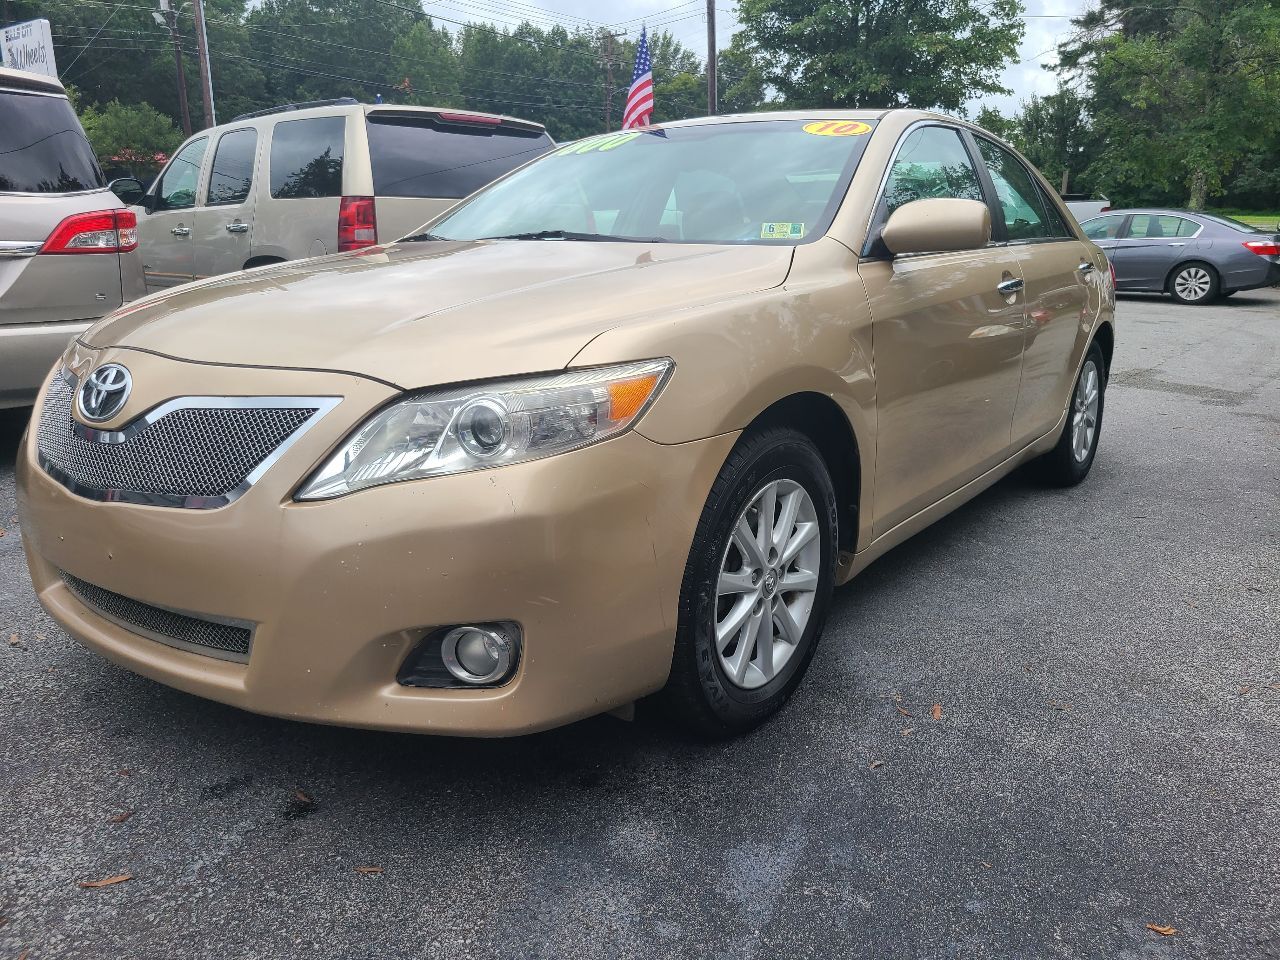 2010 Toyota Camry For Sale In North Carolina - Carsforsale.com®